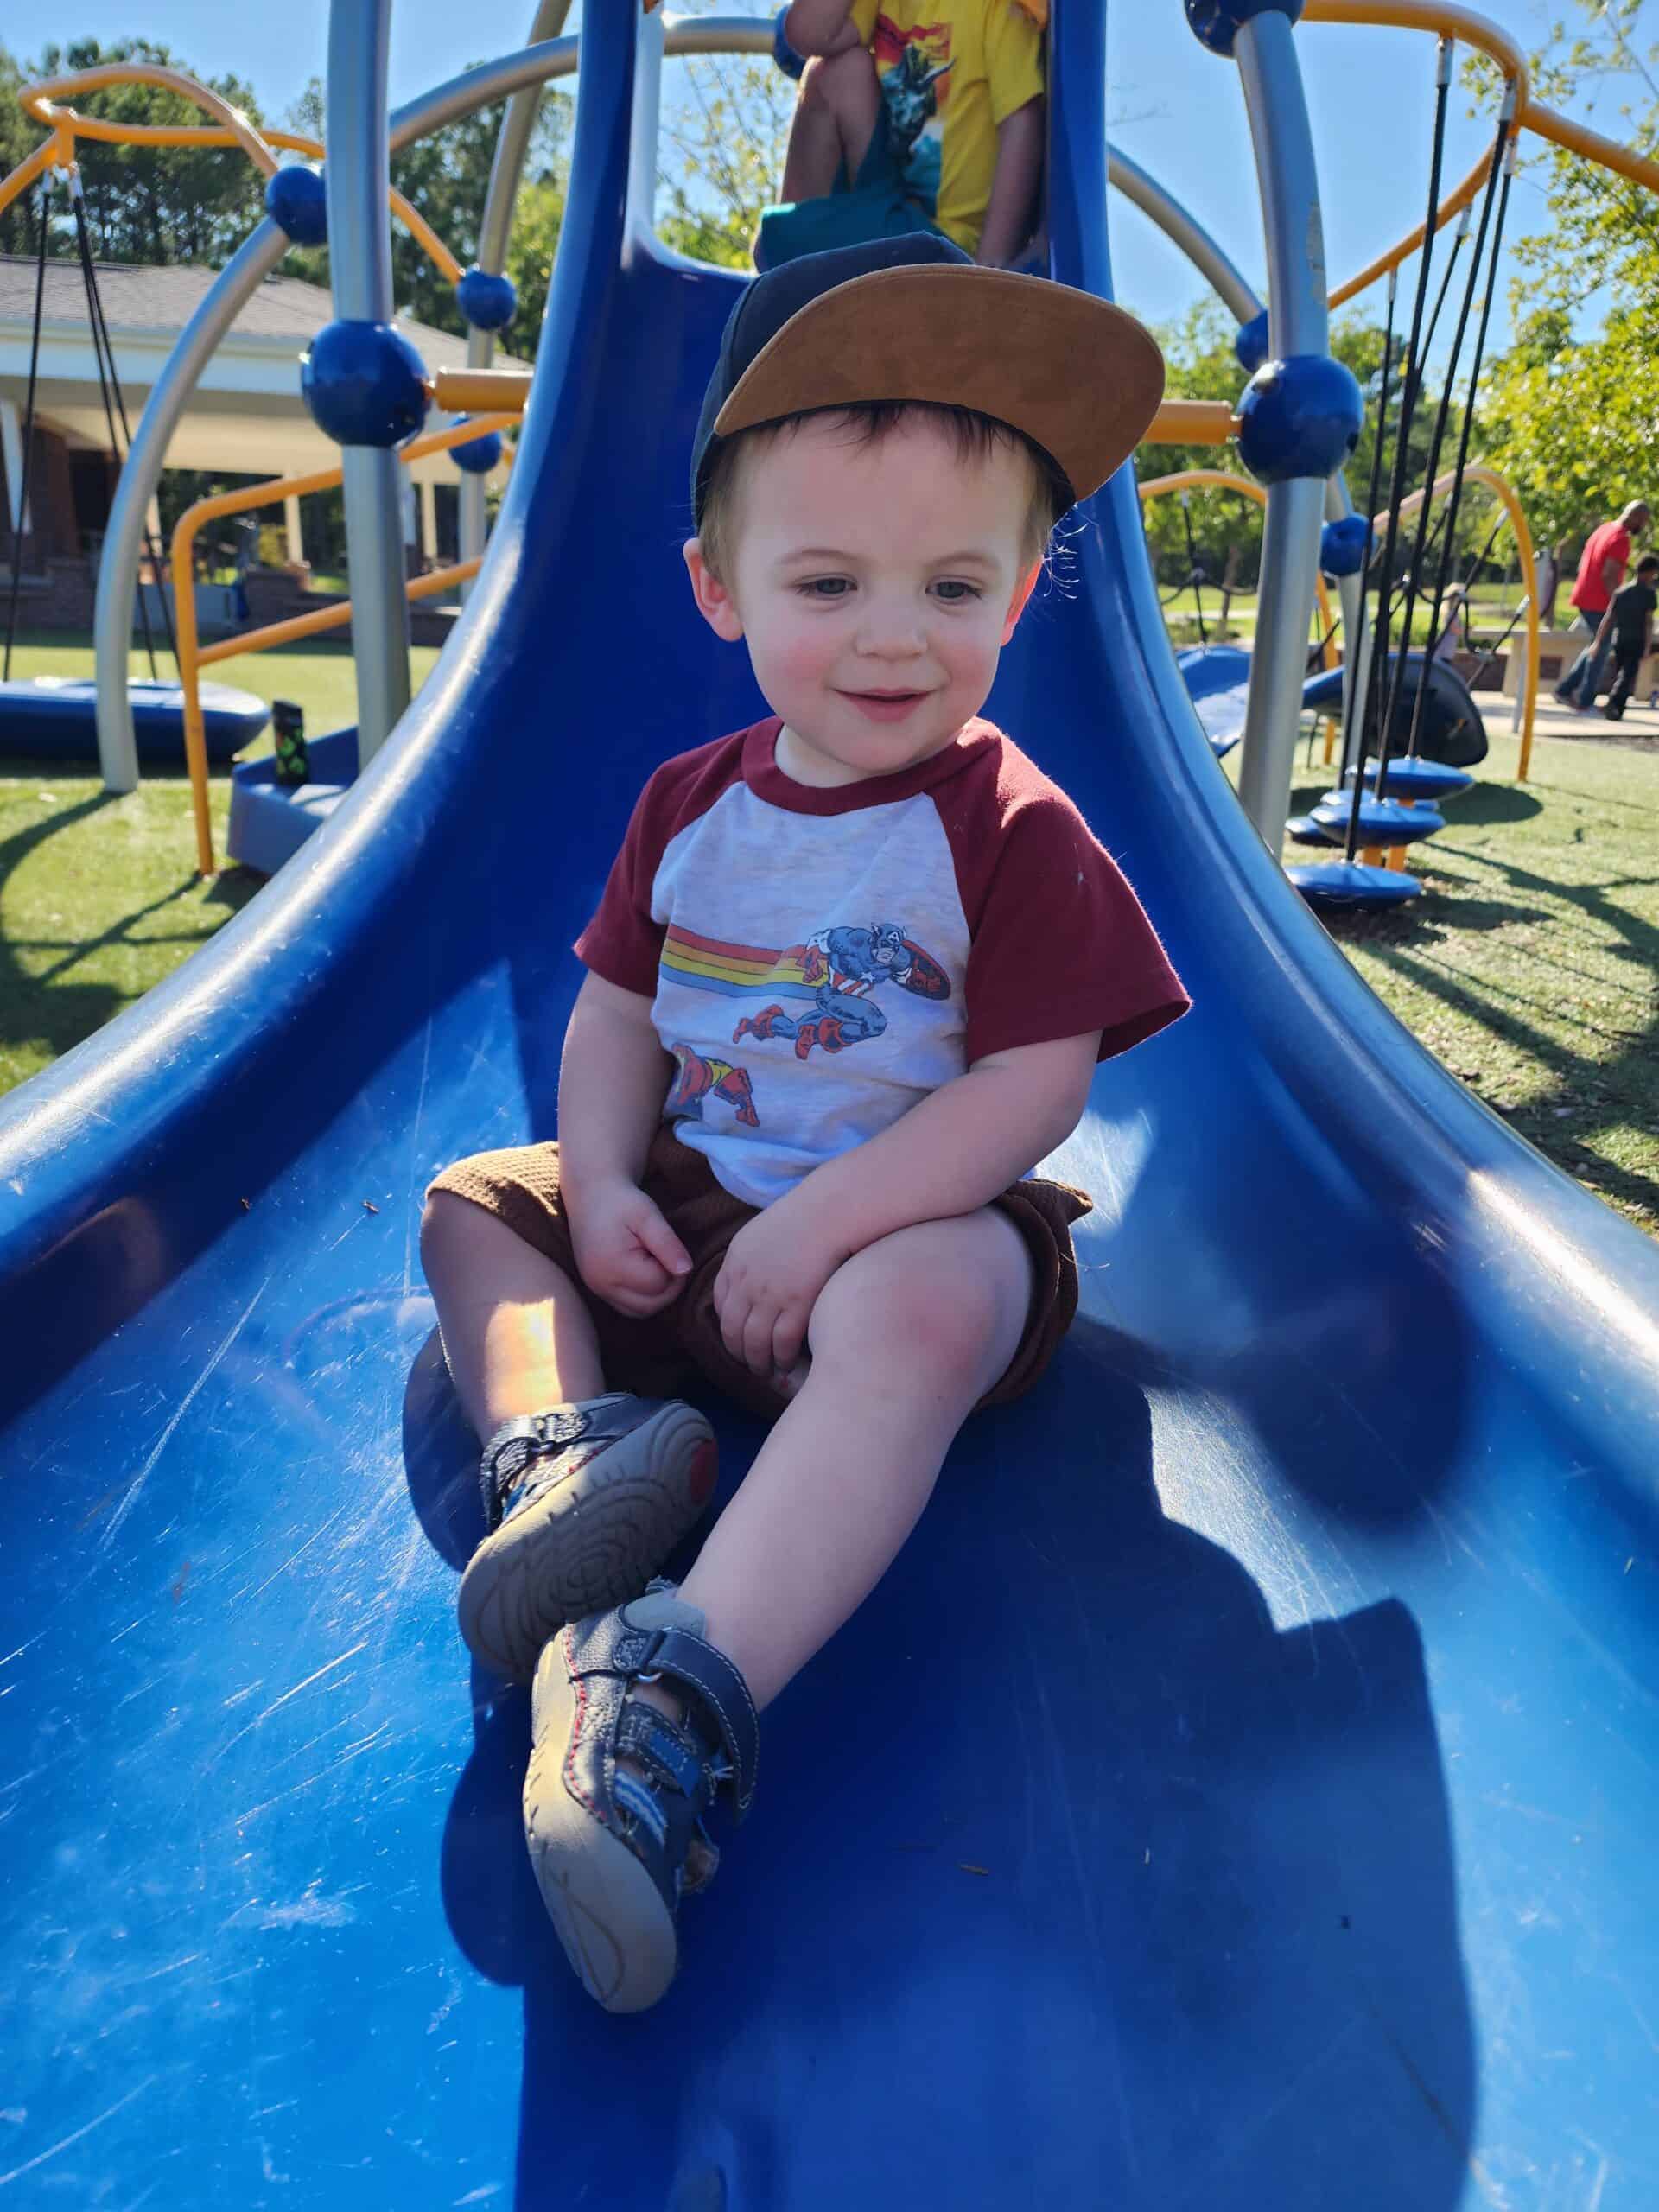 Cheerful toddler with a slight grin, wearing a brown cap, sits on a blue slide at a playground in the Triangle area. His graphic tee and sneakers add a playful touch to this sunny day outdoor activity scene, with other children visible in the background enjoying the equipment.